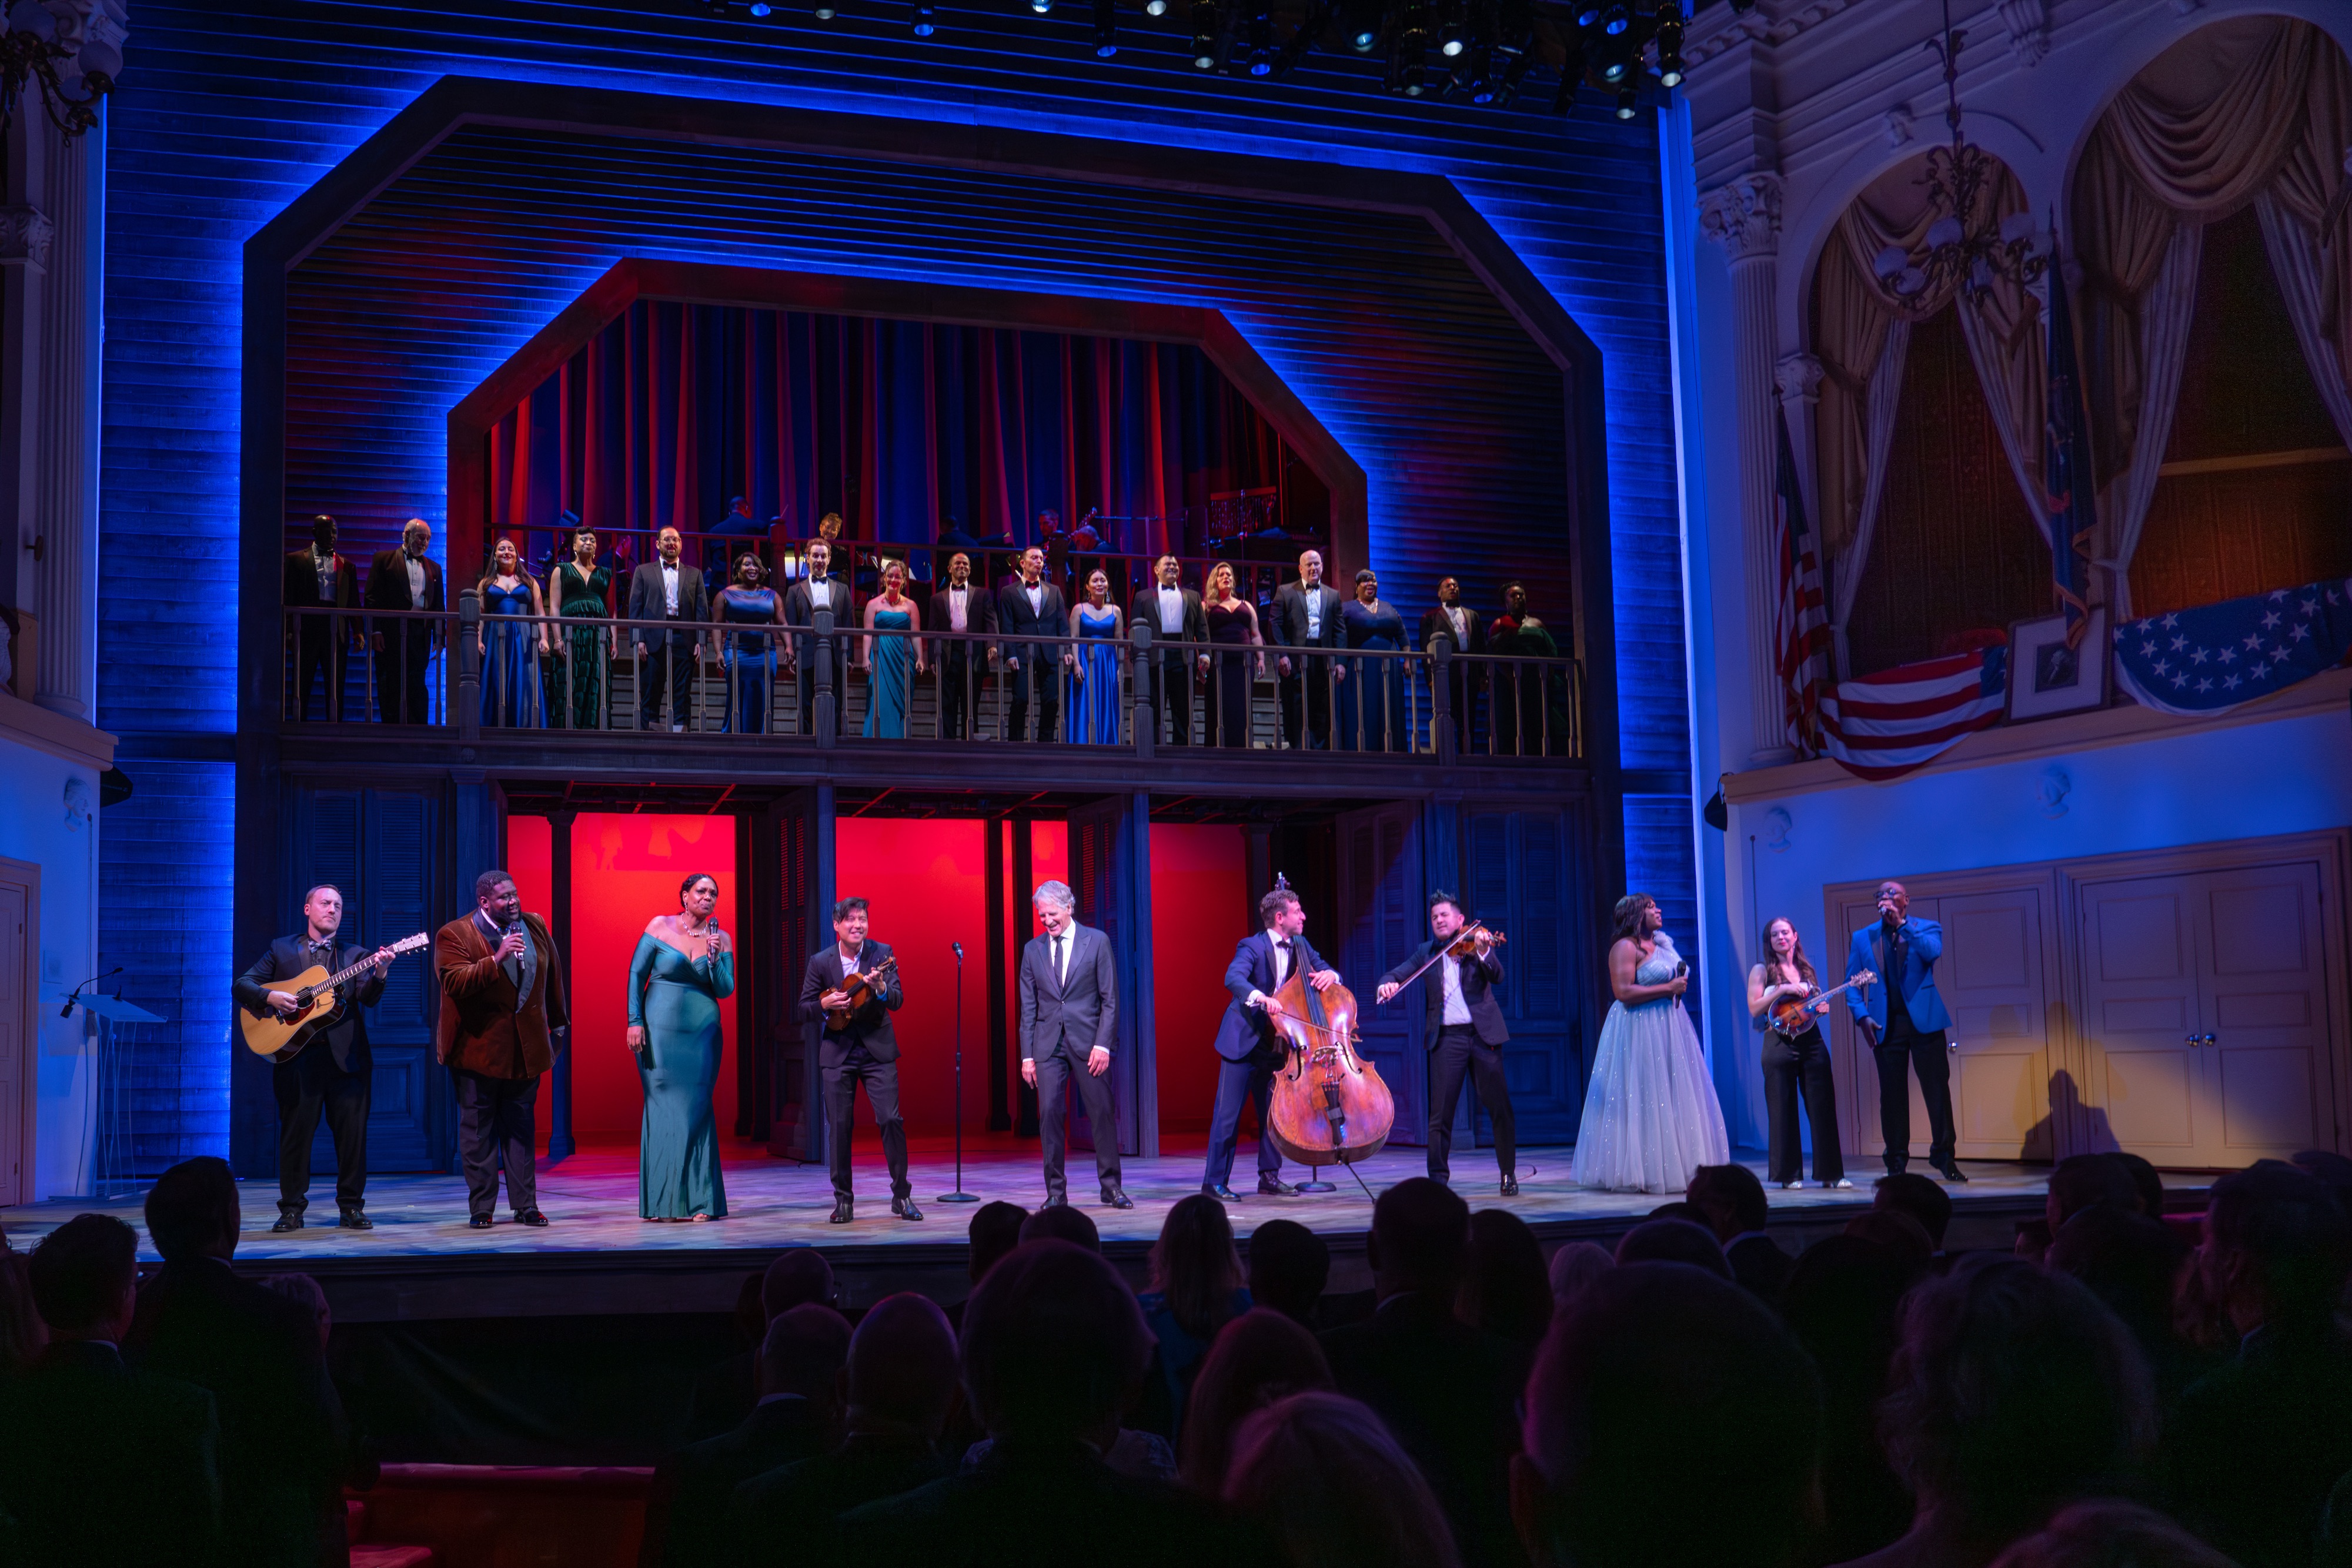 A company of performers all dressed in gala wear assemble on the Ford’s Theatre stage. Featured talent stands on the Ford’s Theatre raked stage. The Ford’s Theatre ensemble stands on a balcony, with the house band behind them. The Presidential Box is visible on their right.